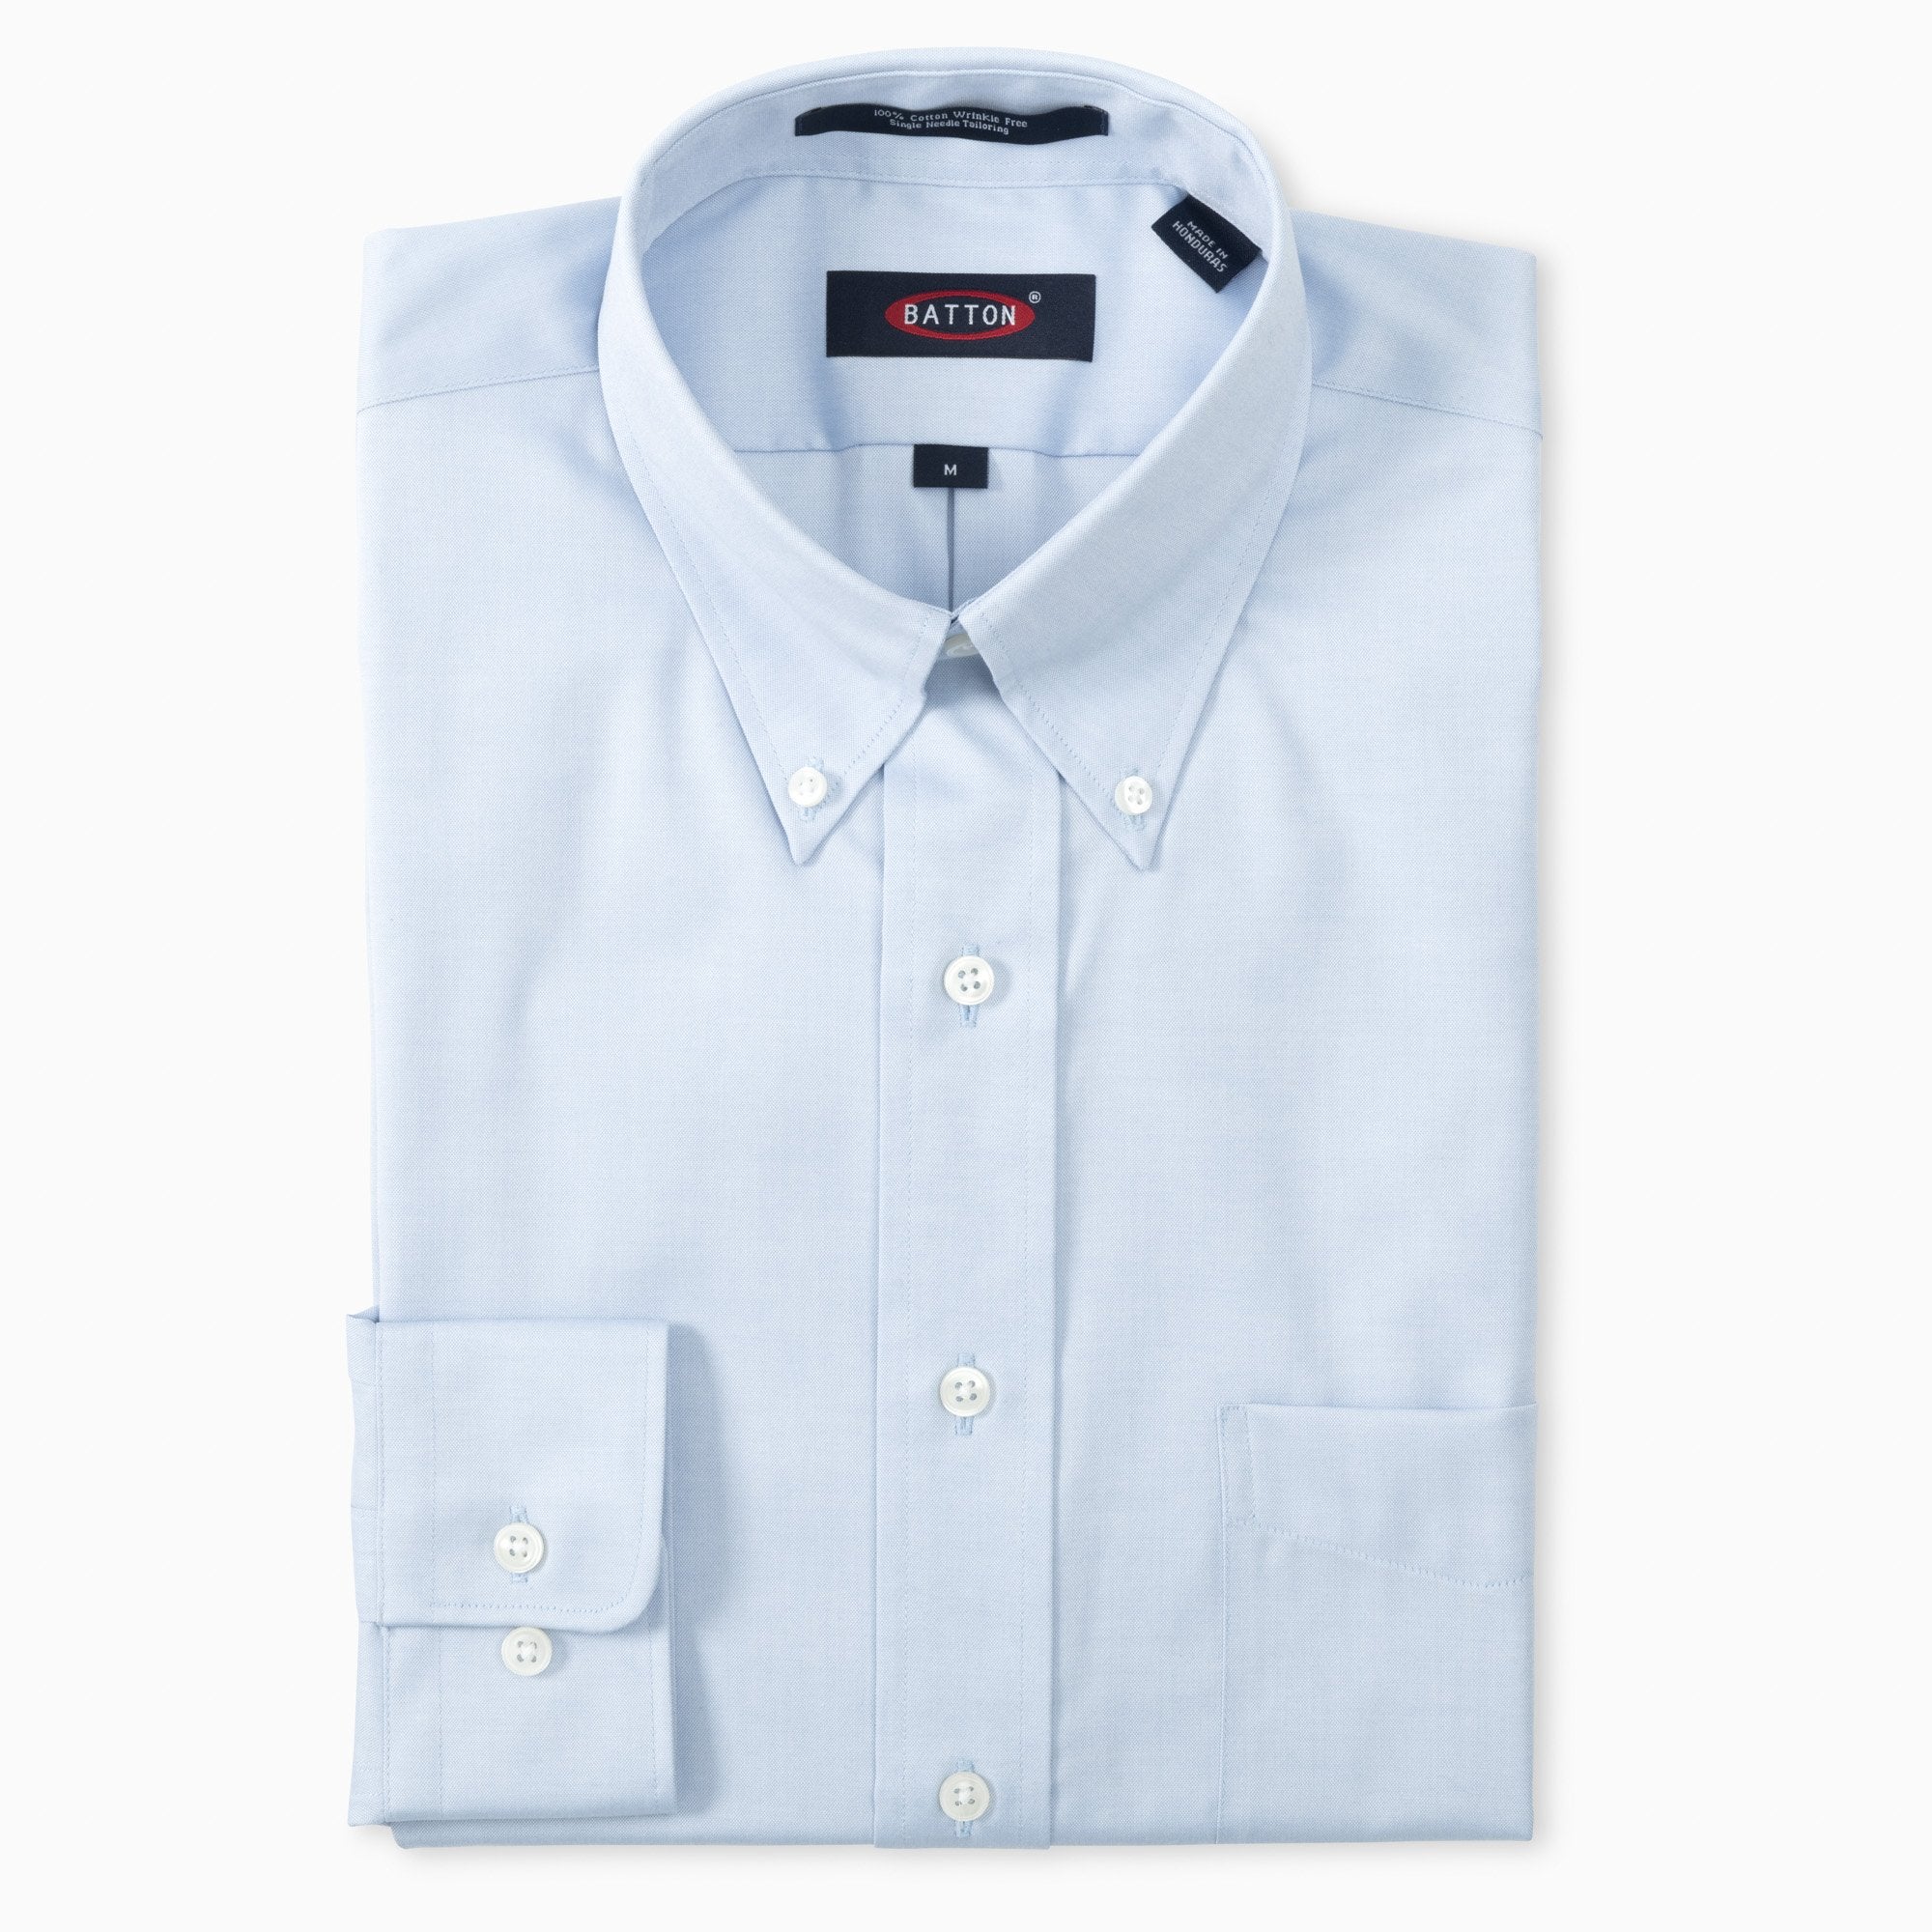 'Andrew' Beyond Non-Iron® Pinpoint Cotton Dress Shirt with Button Down Collar in Blue by Batton